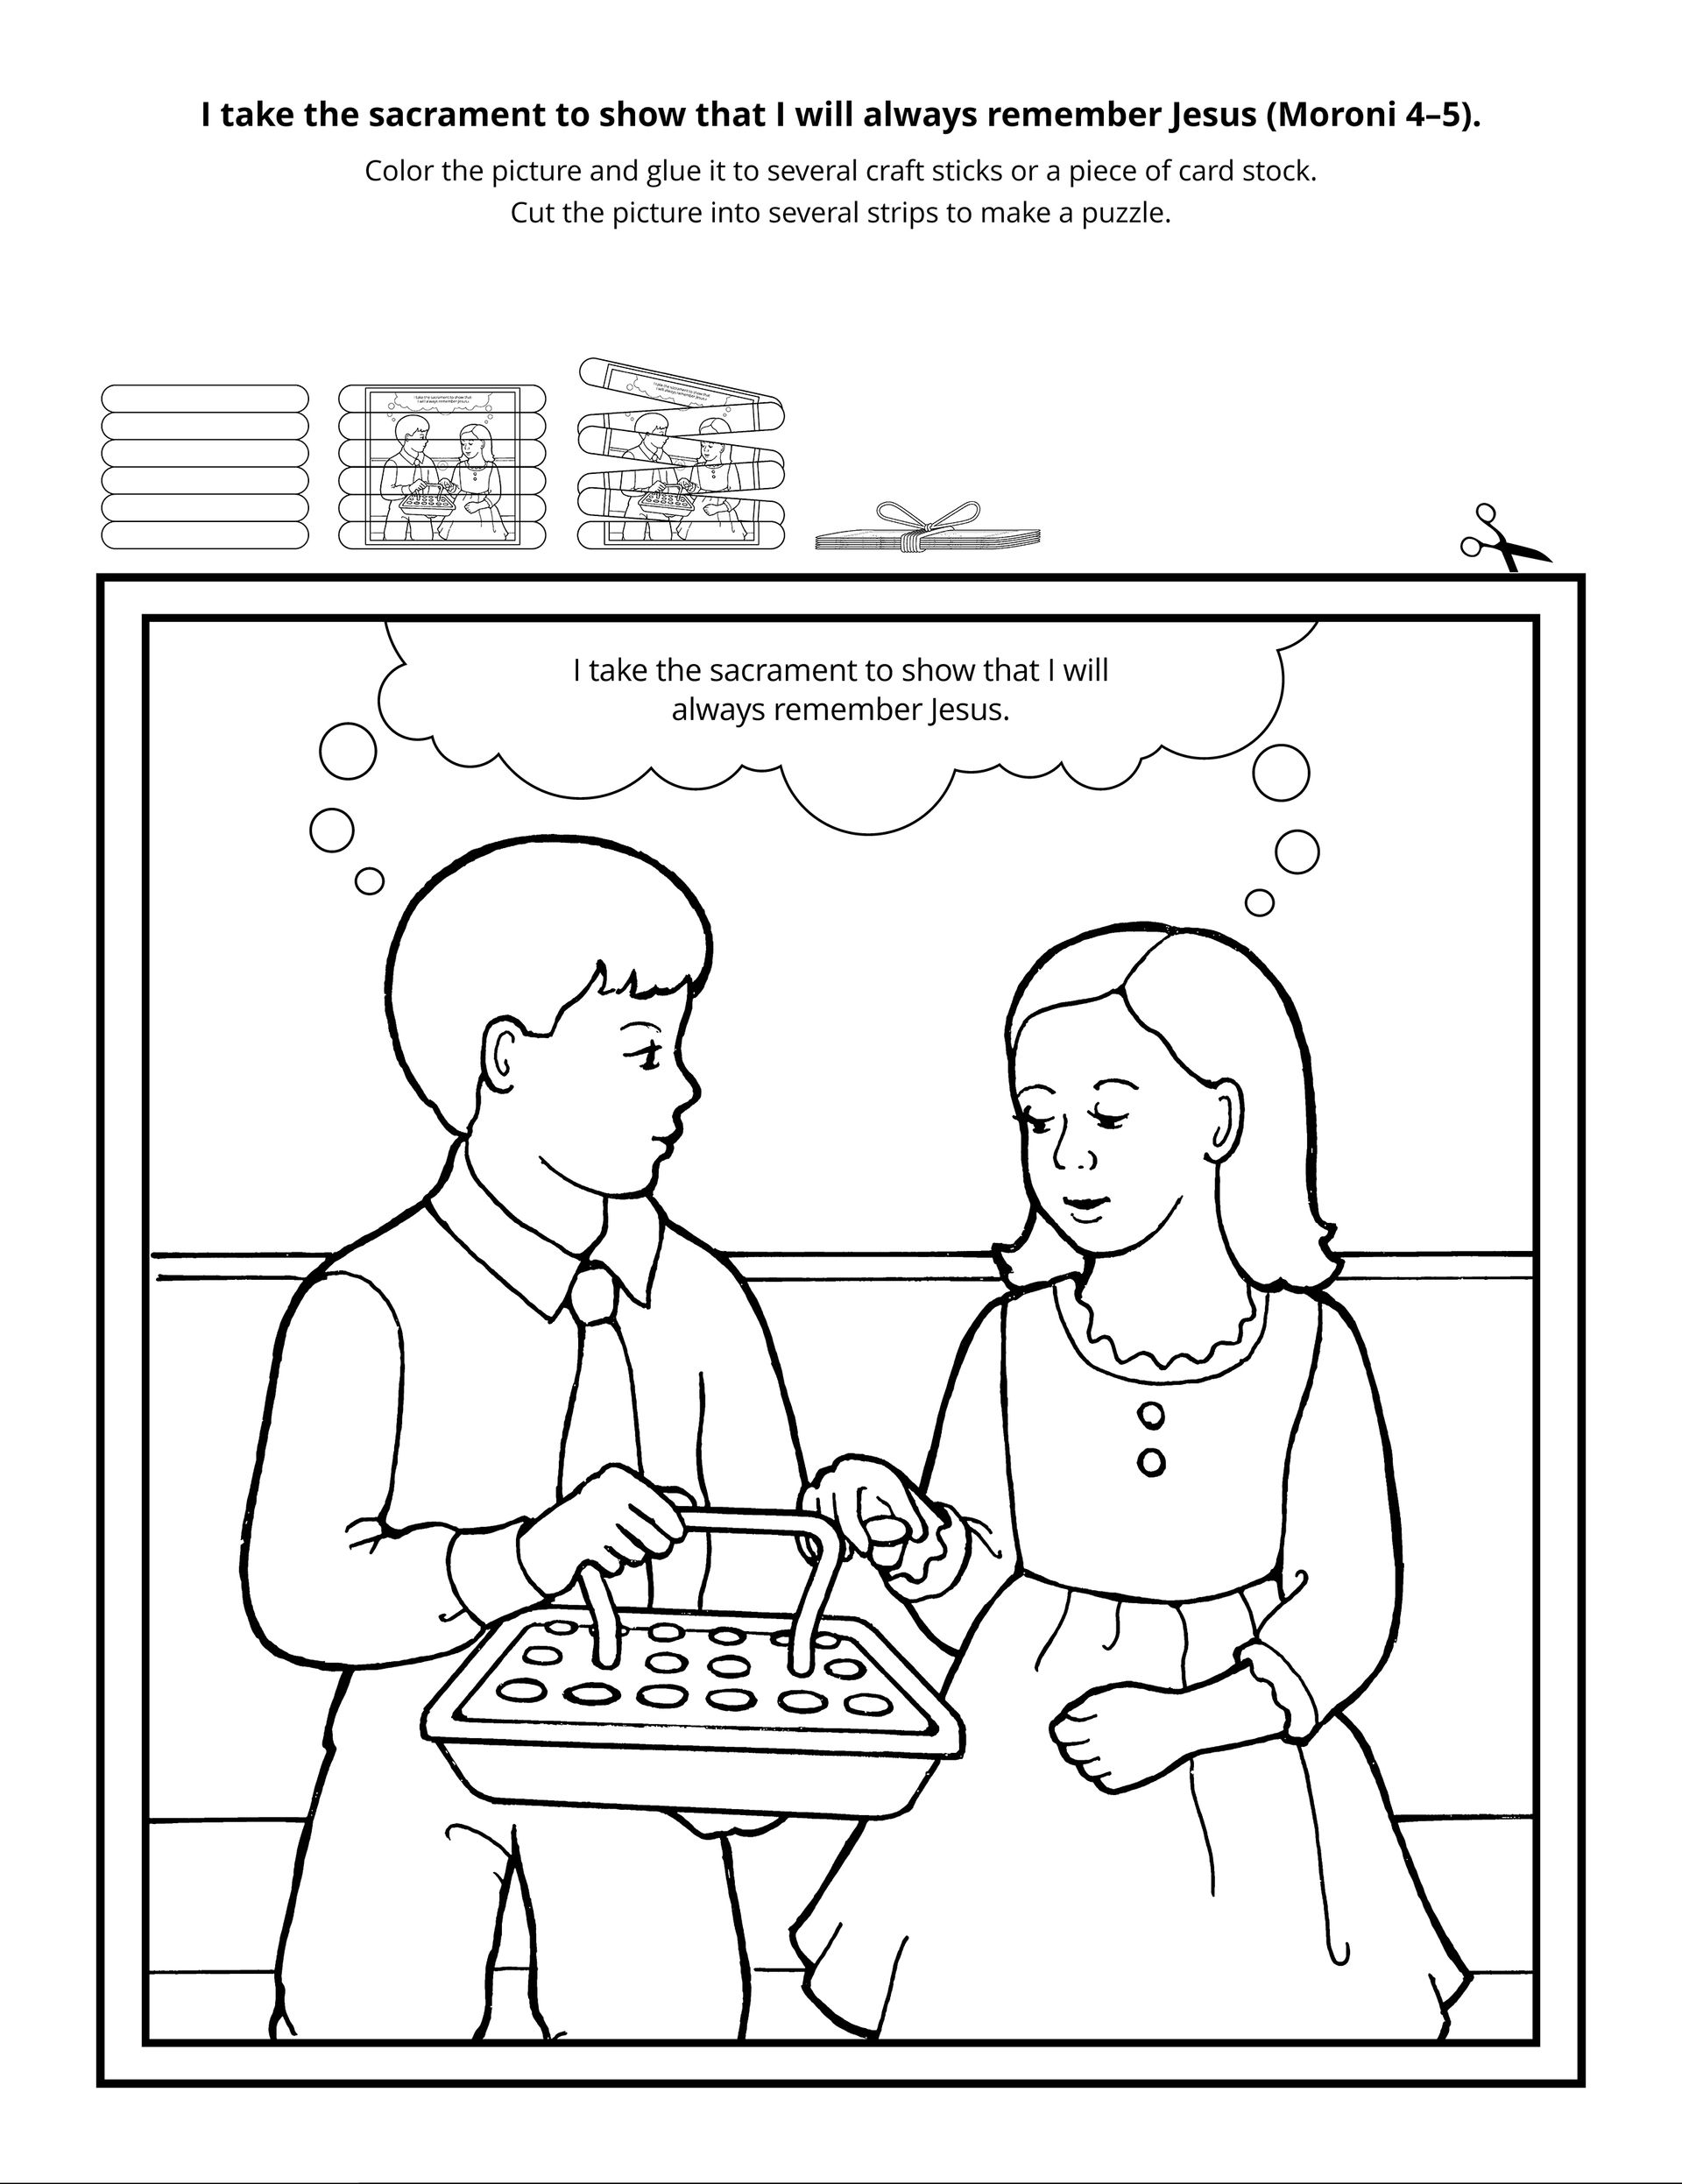 A line drawing of children taking the sacrament.